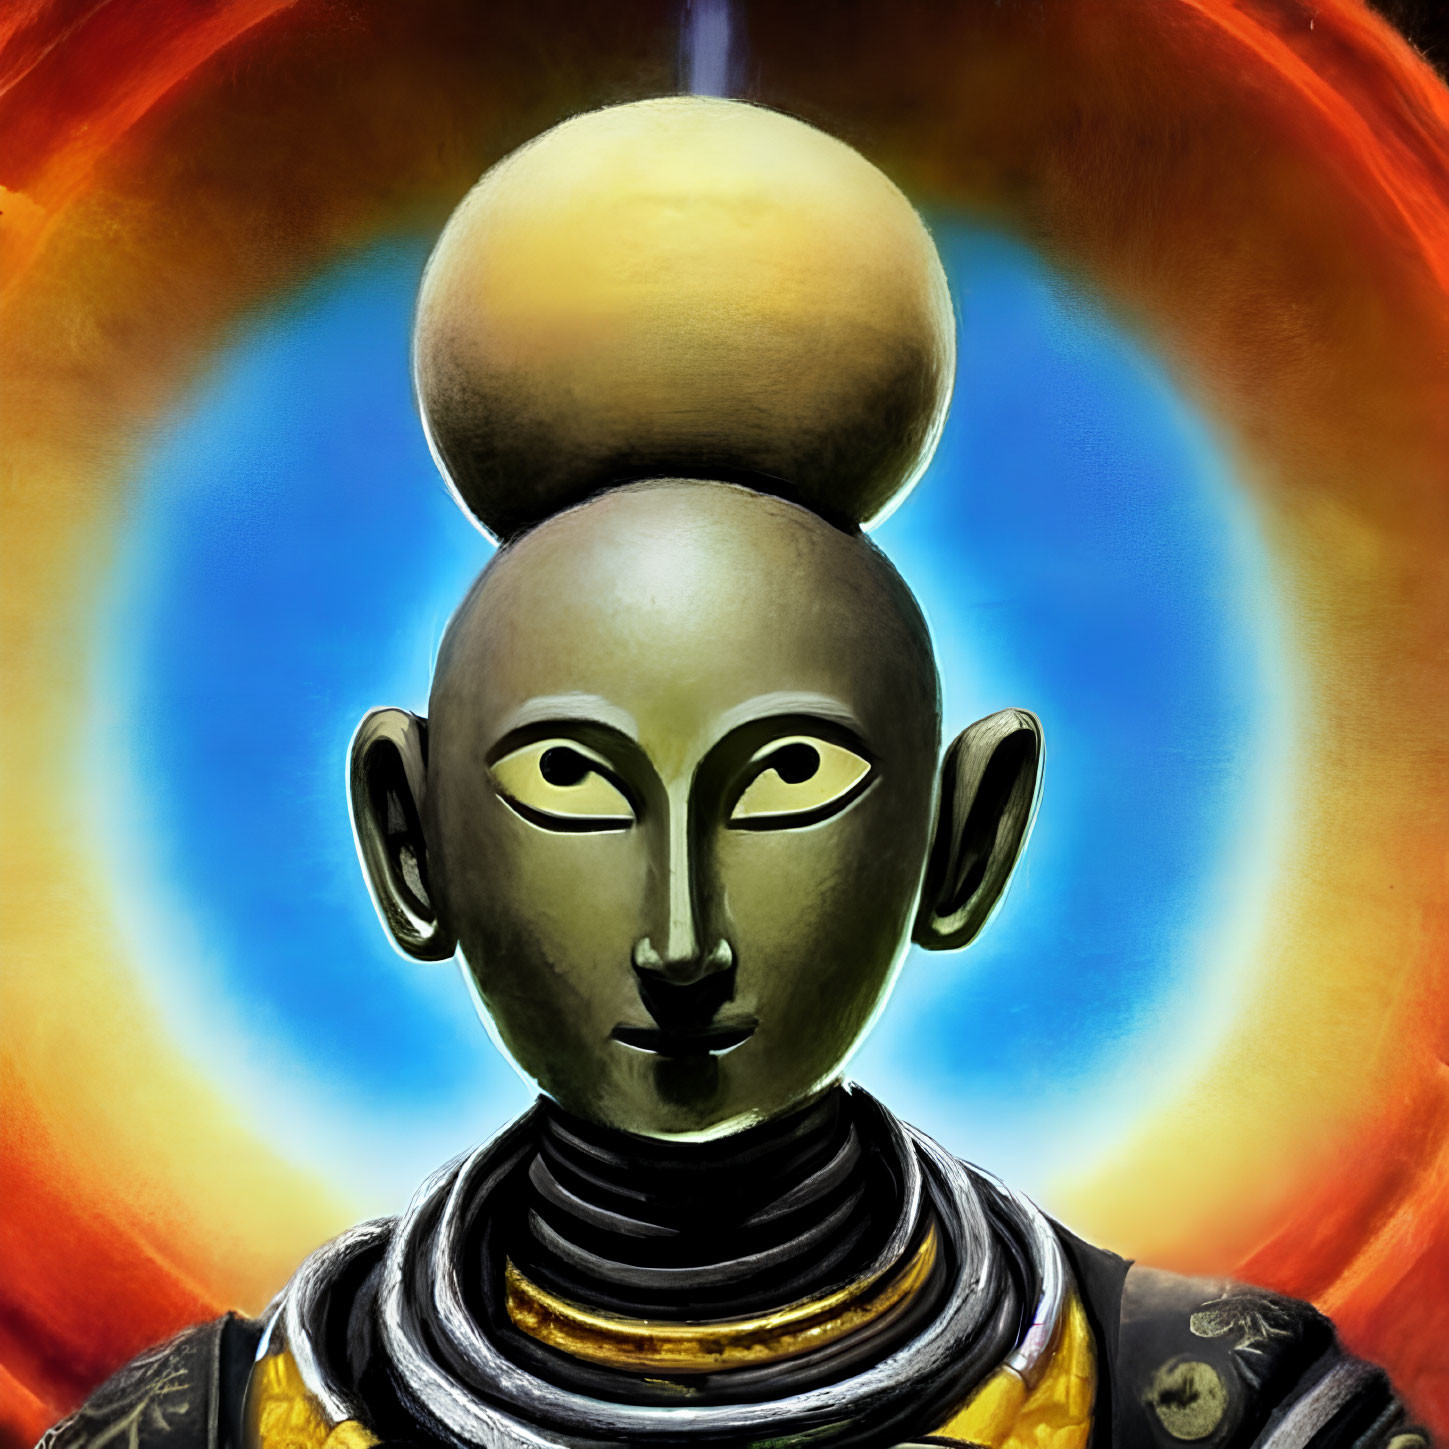 Golden-skinned humanoid figure with orb, pointy ears, and halo background.